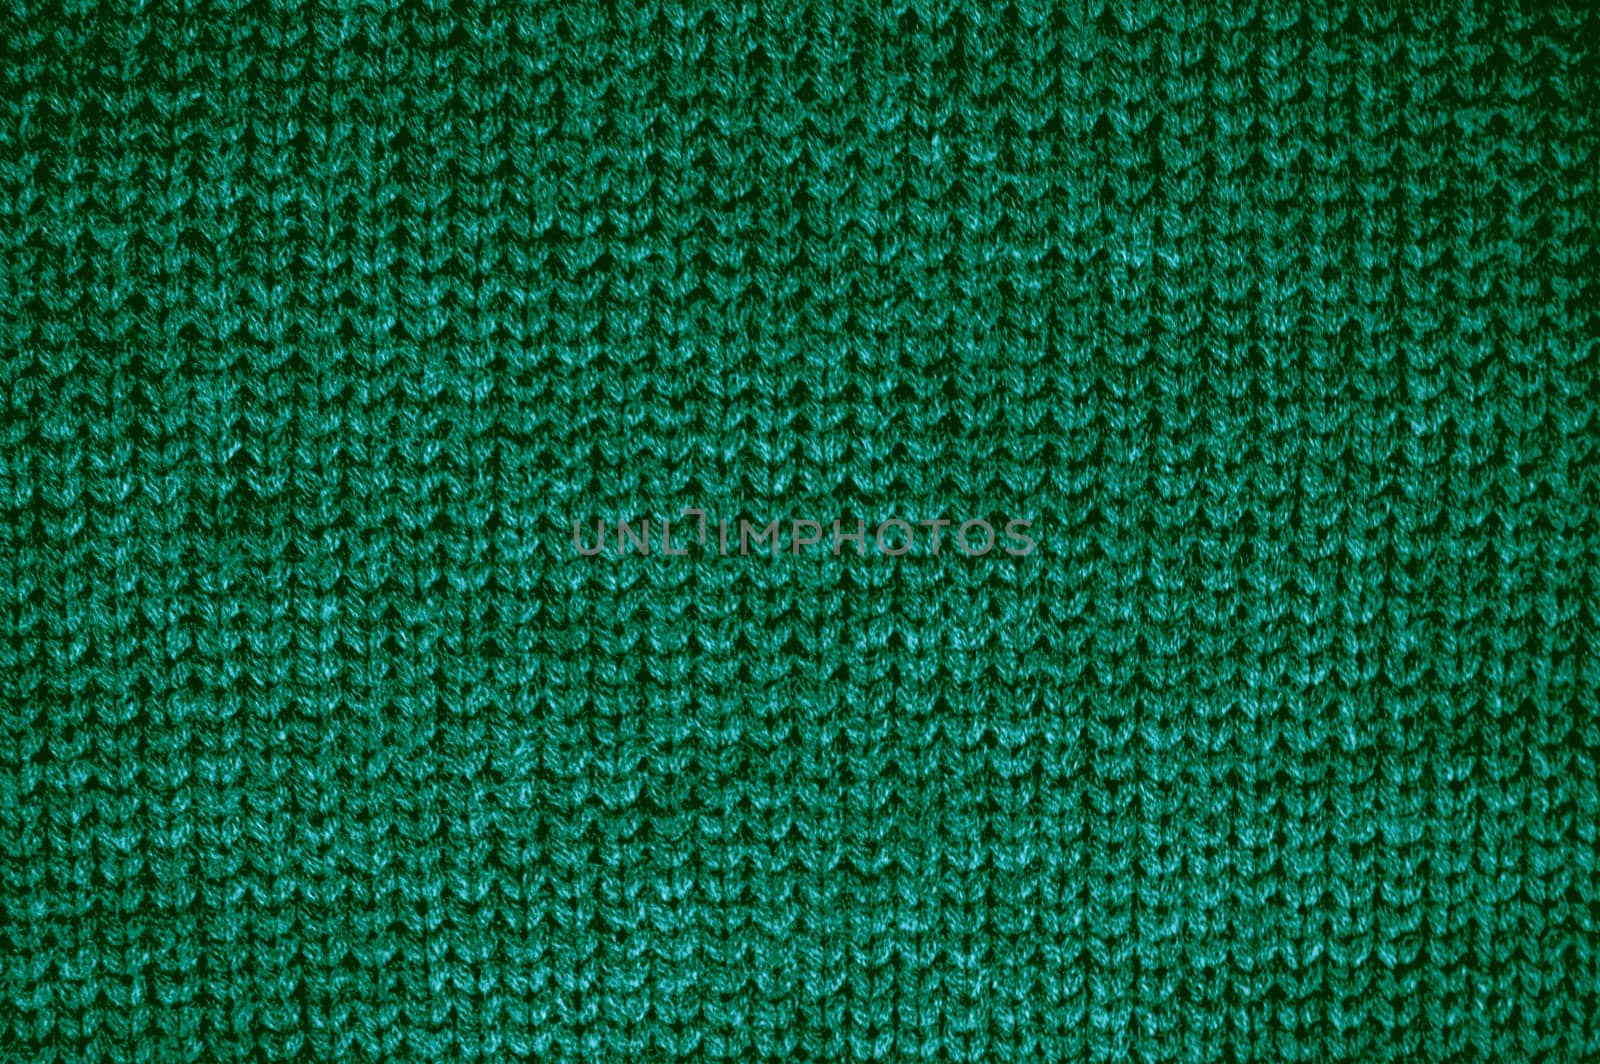 Cotton Knitwear Texture. Organic Knitted Background. Weave Jacquard Winter Textile. Pullover Texture. Fiber Thread. Nordic Holiday Carpet. Linen Blanket Material. Knitwear Texture.